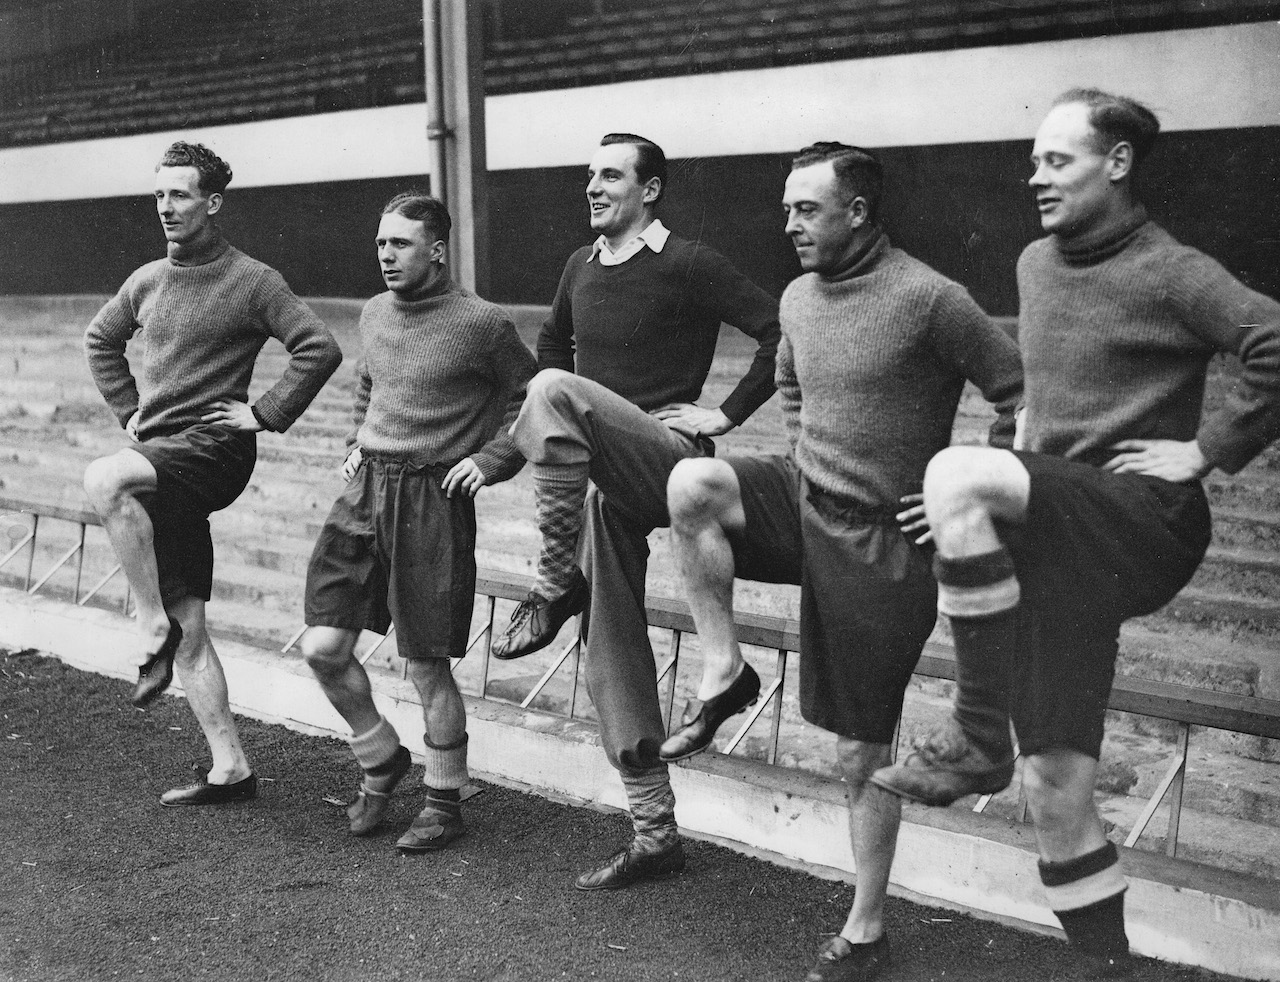 The British tennis player Fred Perry (center) trains with football players Male - Hulme - Roberts and Heasley (Arsenal). Arsenal Stadium. London. 21th February 1936. Photograph. (Photo by Austrian Archives/Imagno/Getty Images)